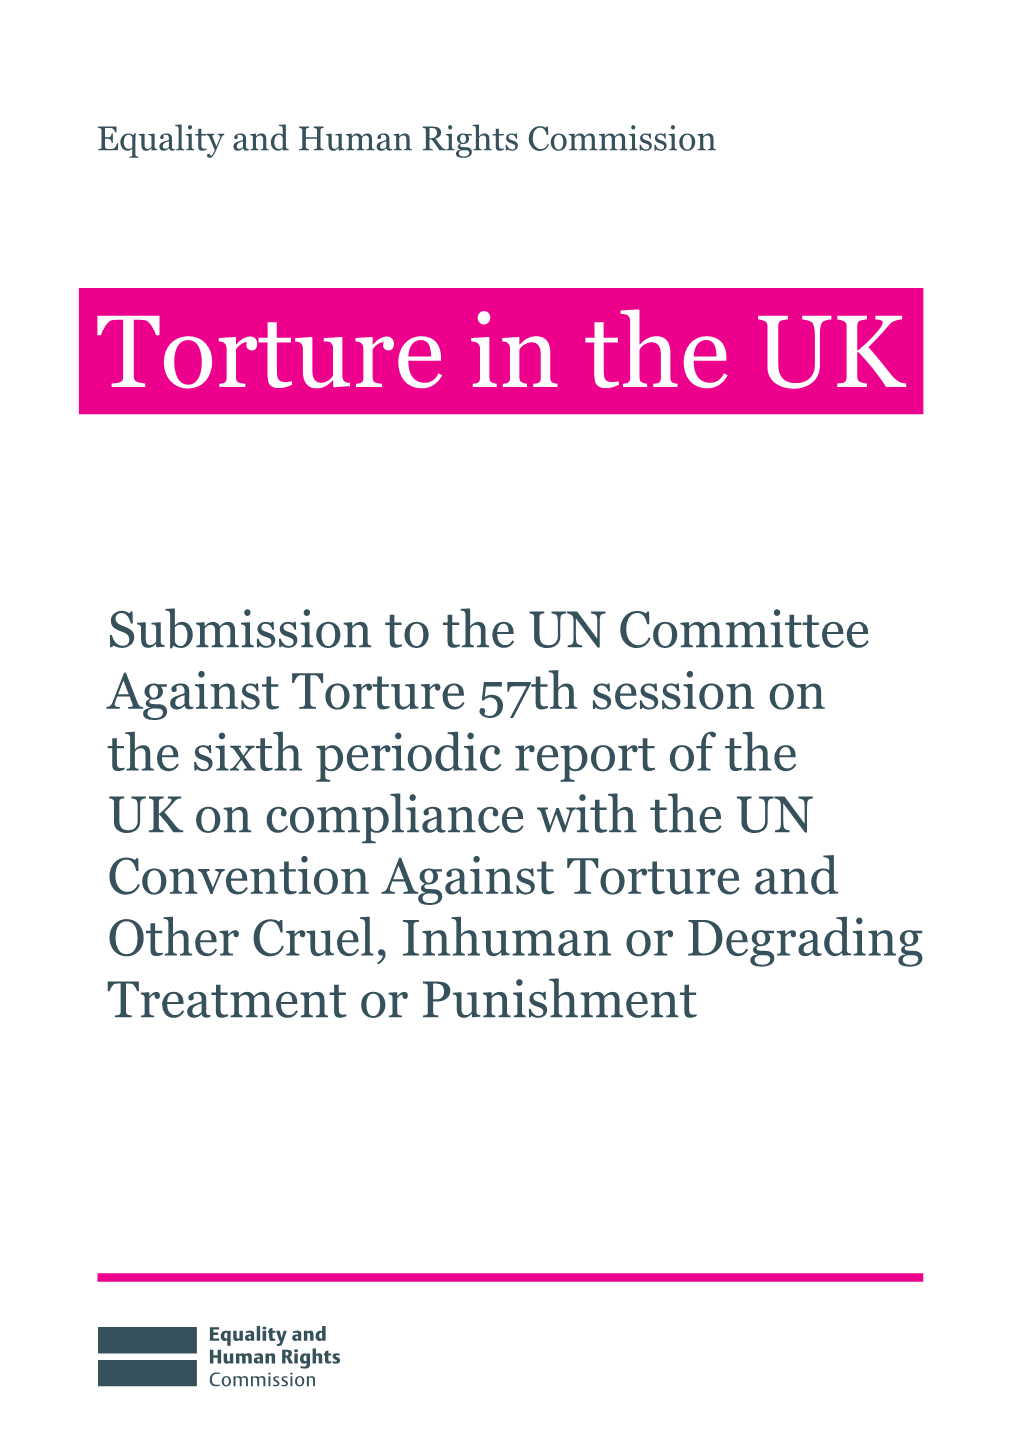 Torture in the UK Review